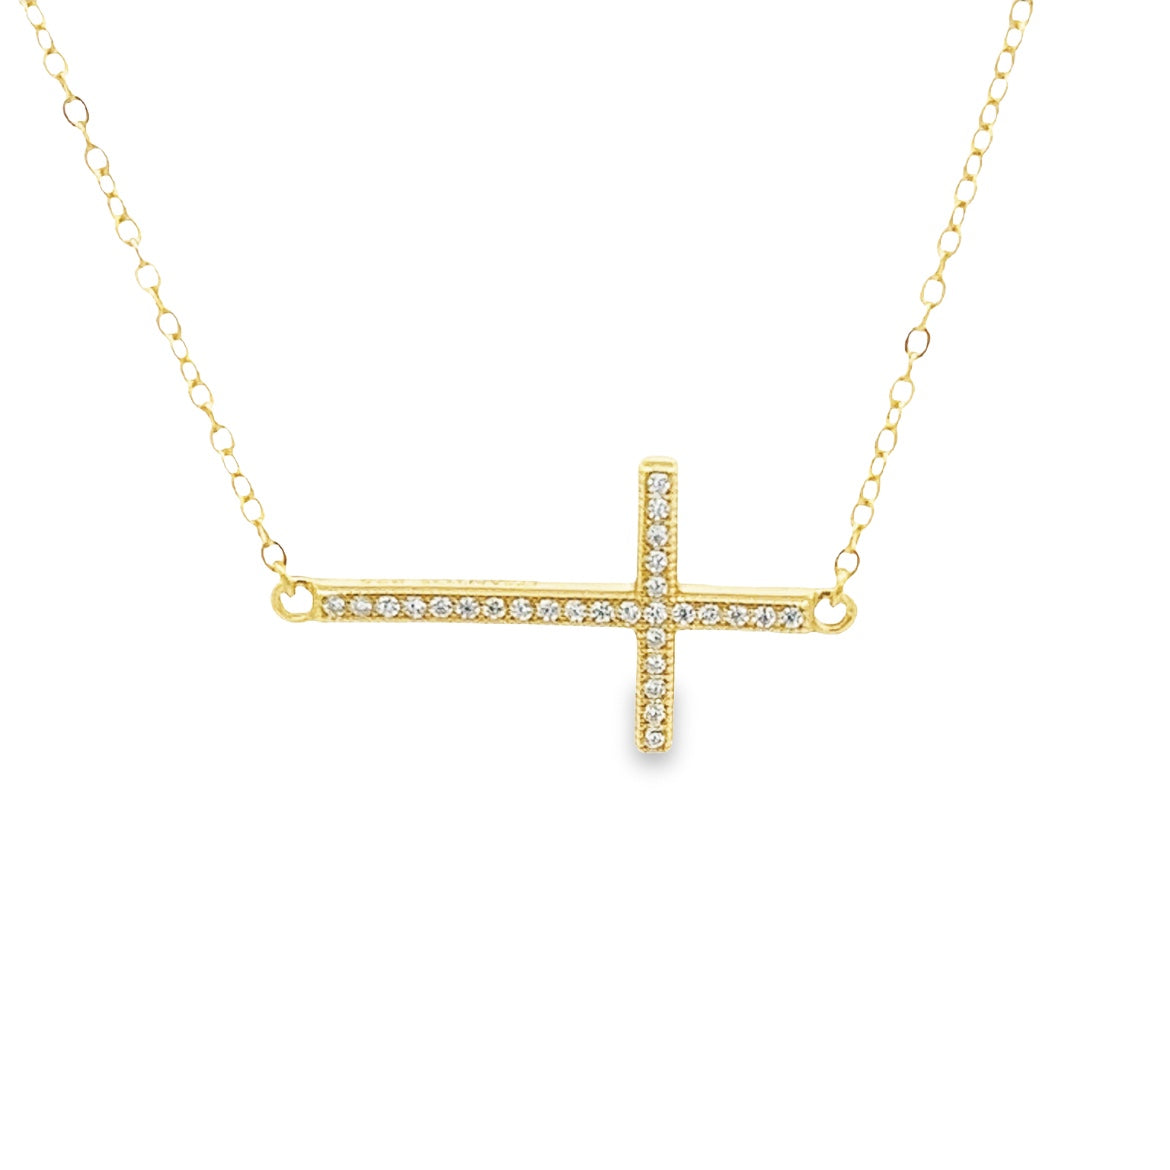 925 SILVER GOLD PLATED CROSS PENDANT WITH CRYSTALS